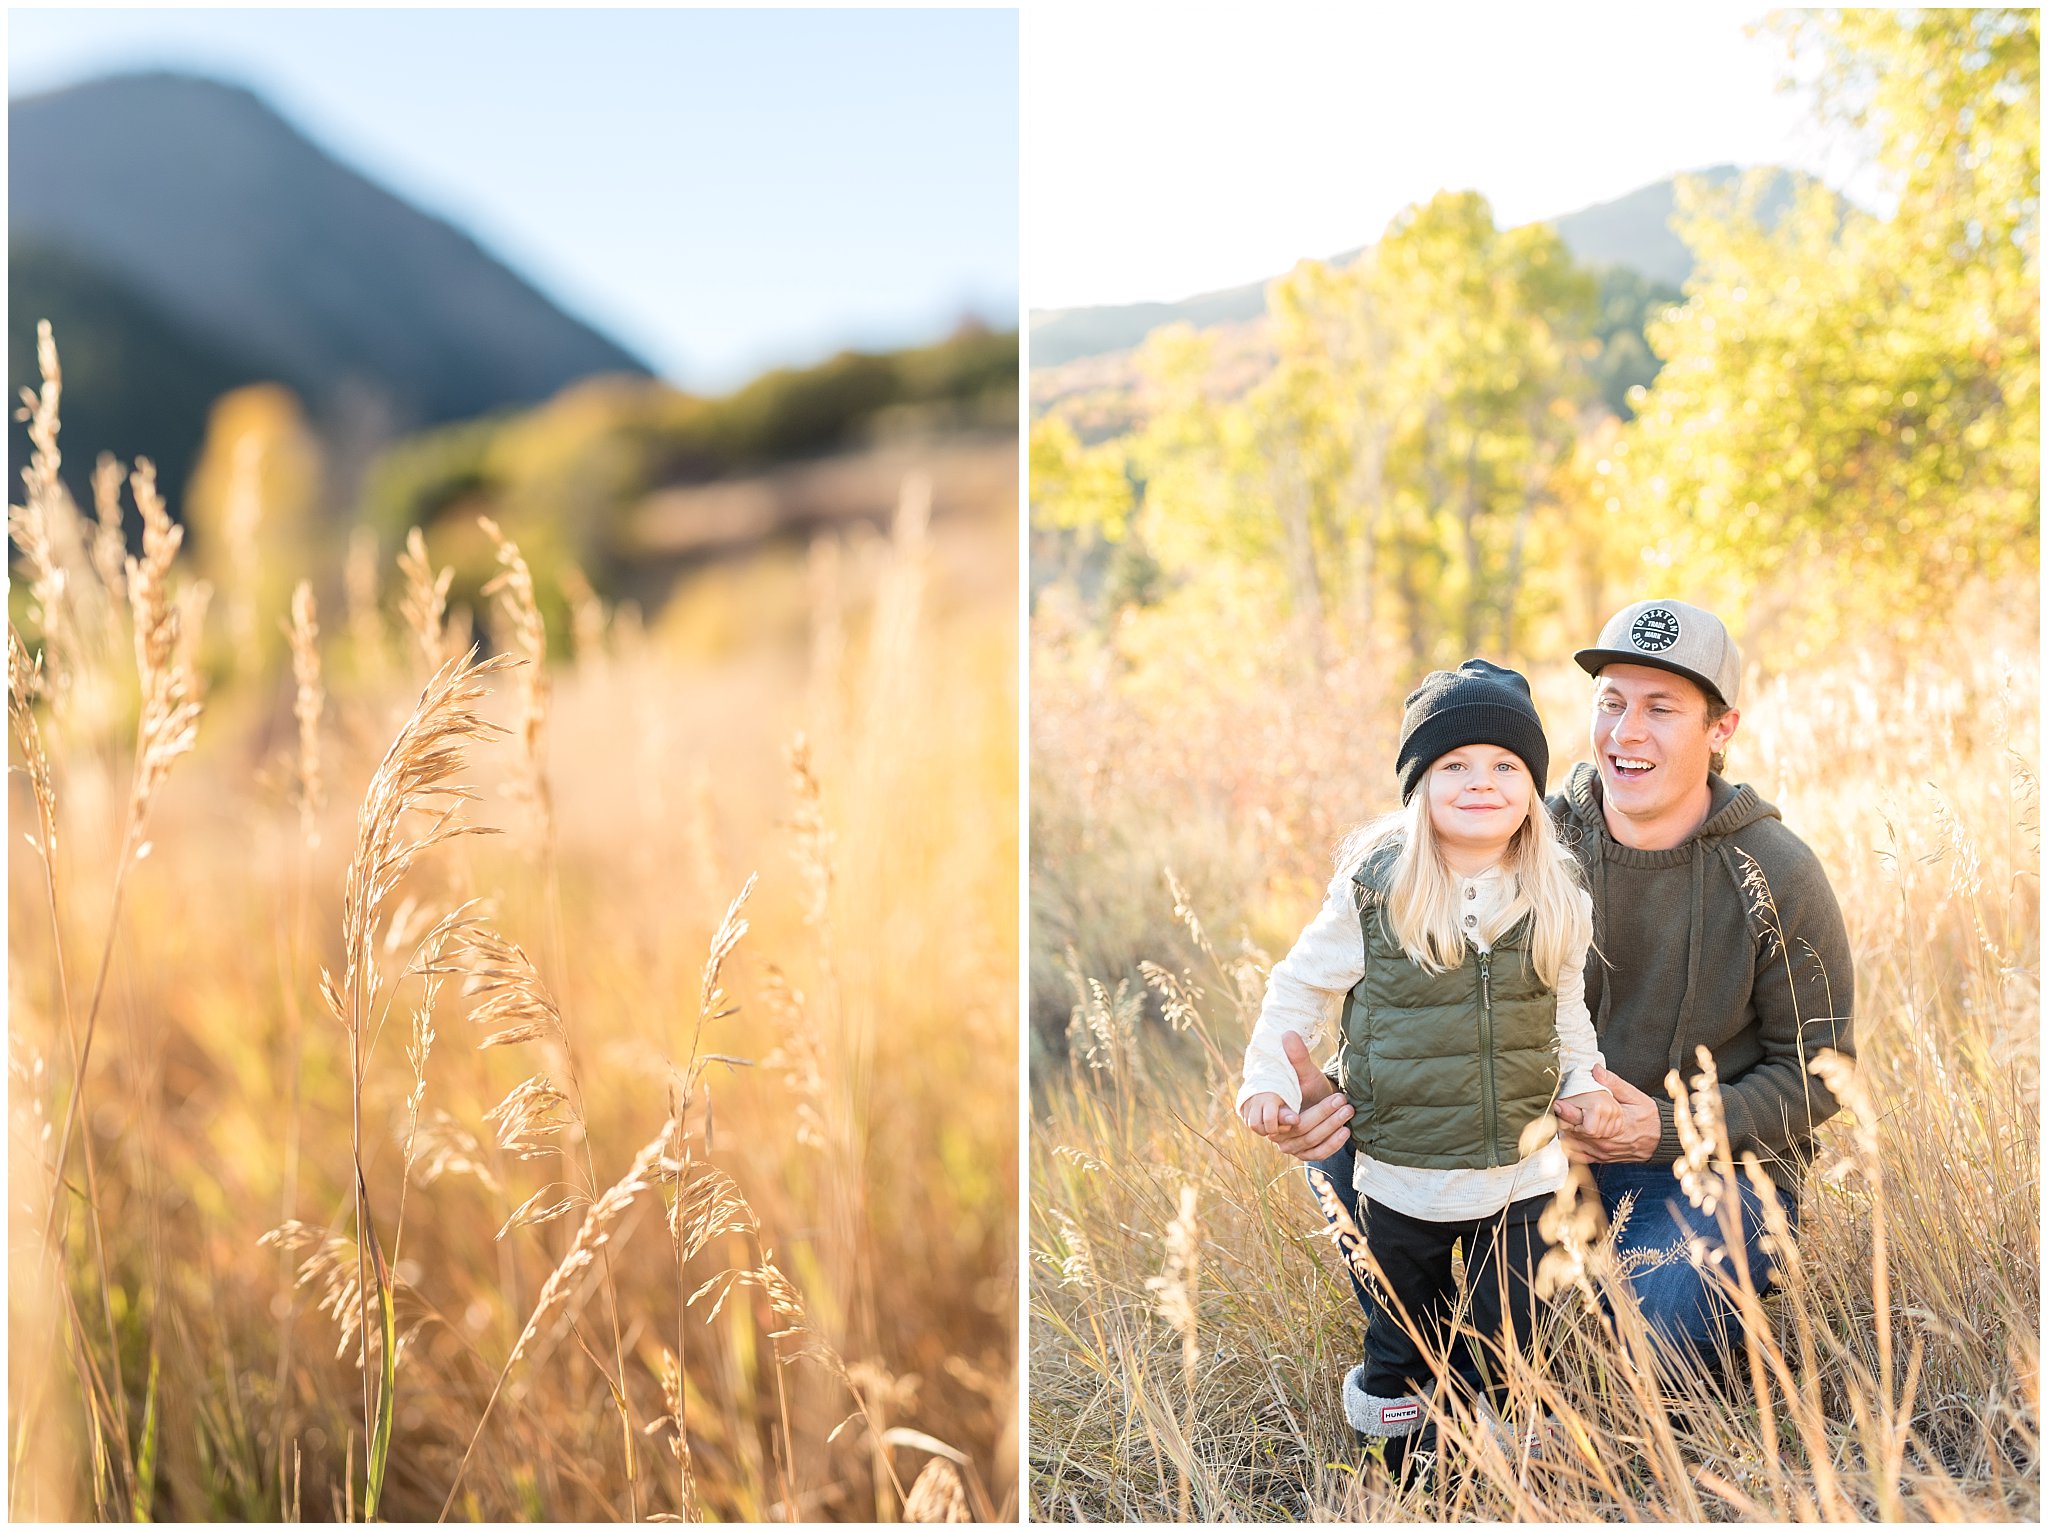 Father and son at Snowbasin in the fall | Fall Family Pictures in the Mountains | Snowbasin, Utah | Jessie and Dallin